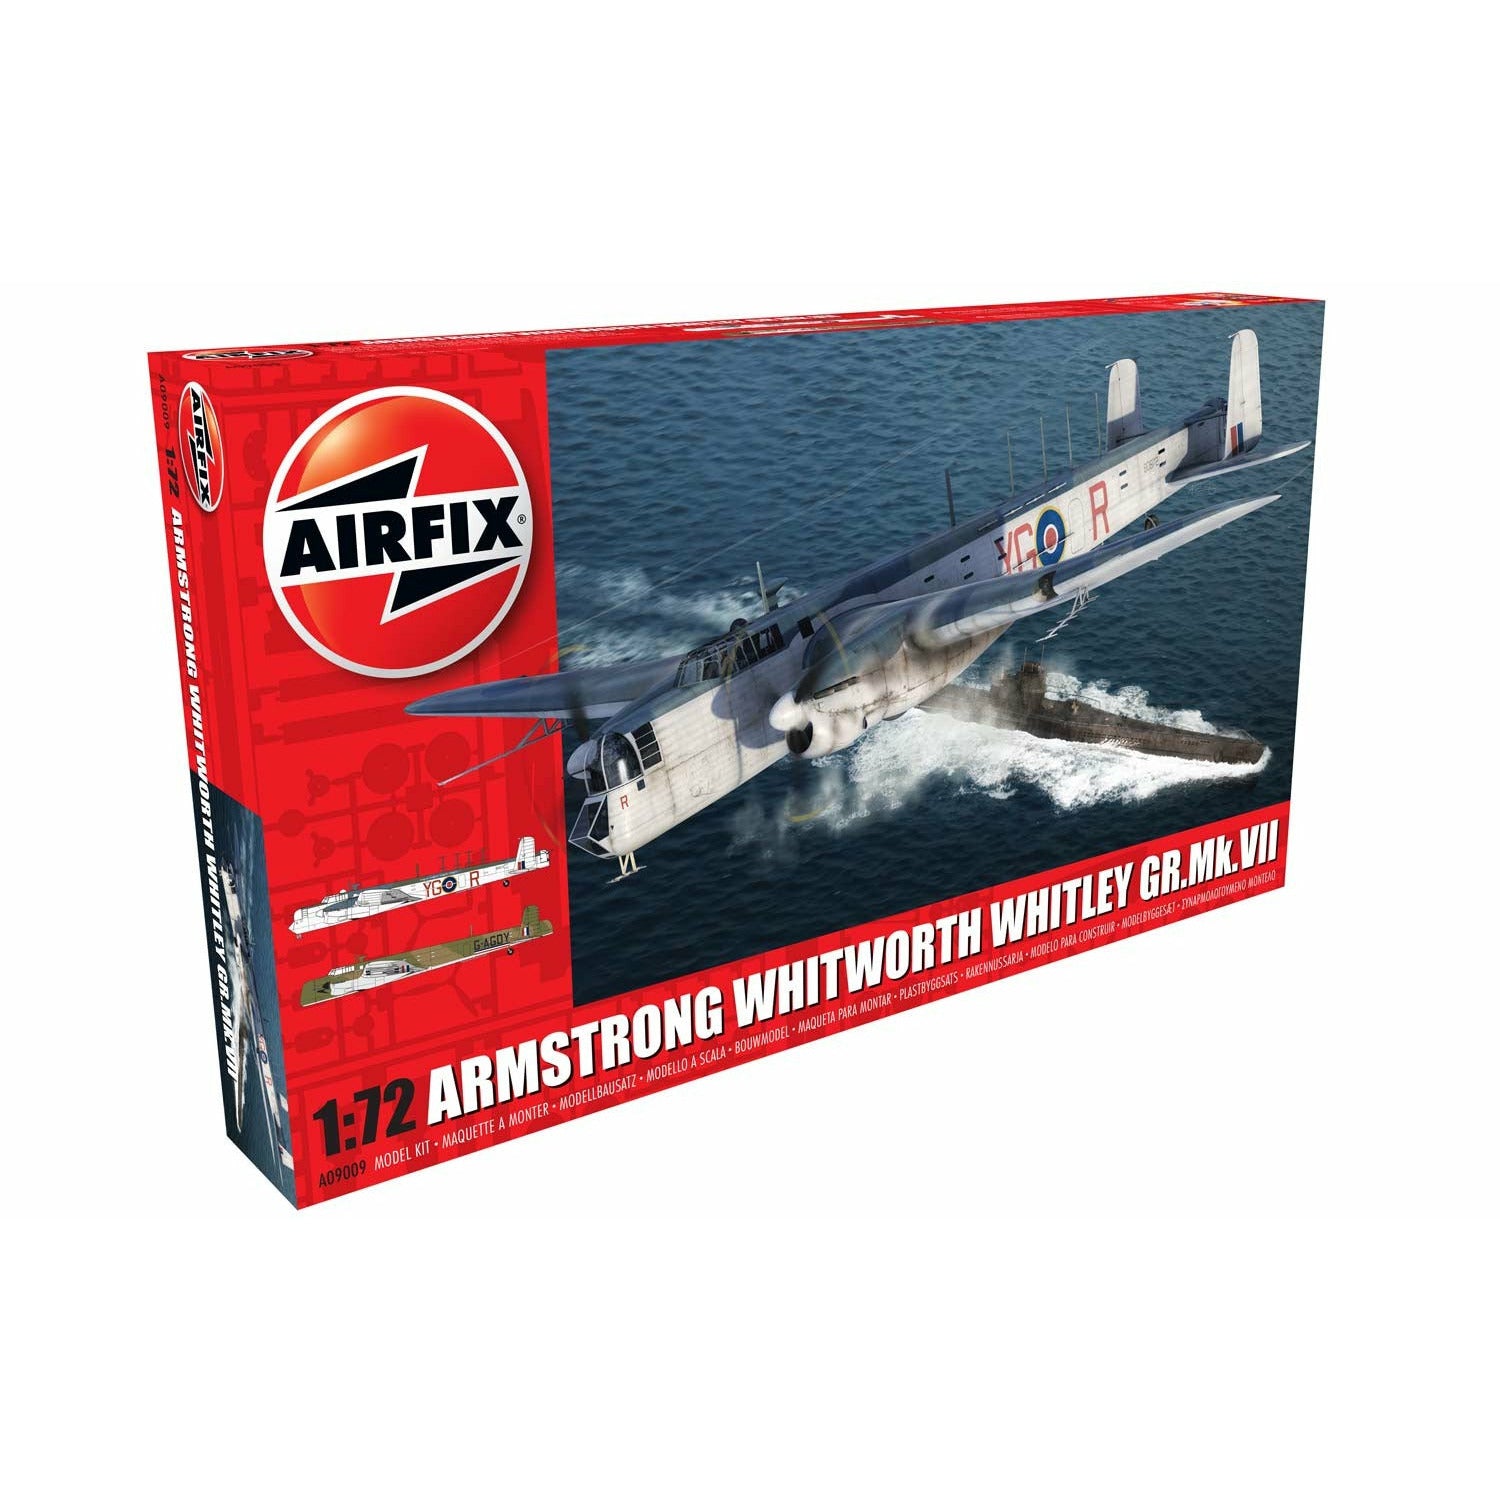 Armstrong Witworth Whiteley Mk.VII 1/72 #09009 by Airfix